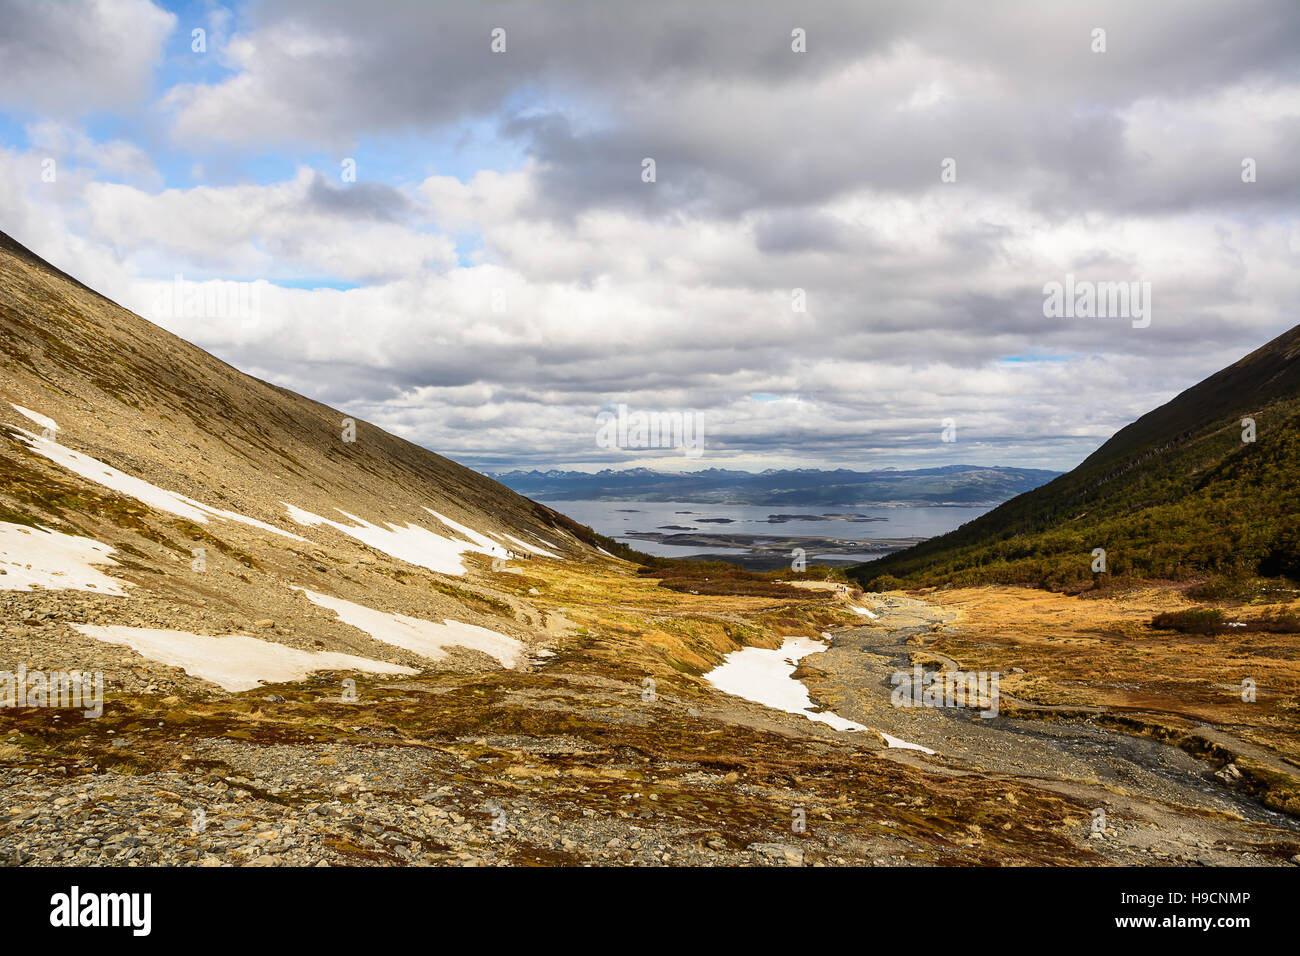 Beagle channel and Ushuaia seen from the Martial Glacier(Argentina) Stock Photo